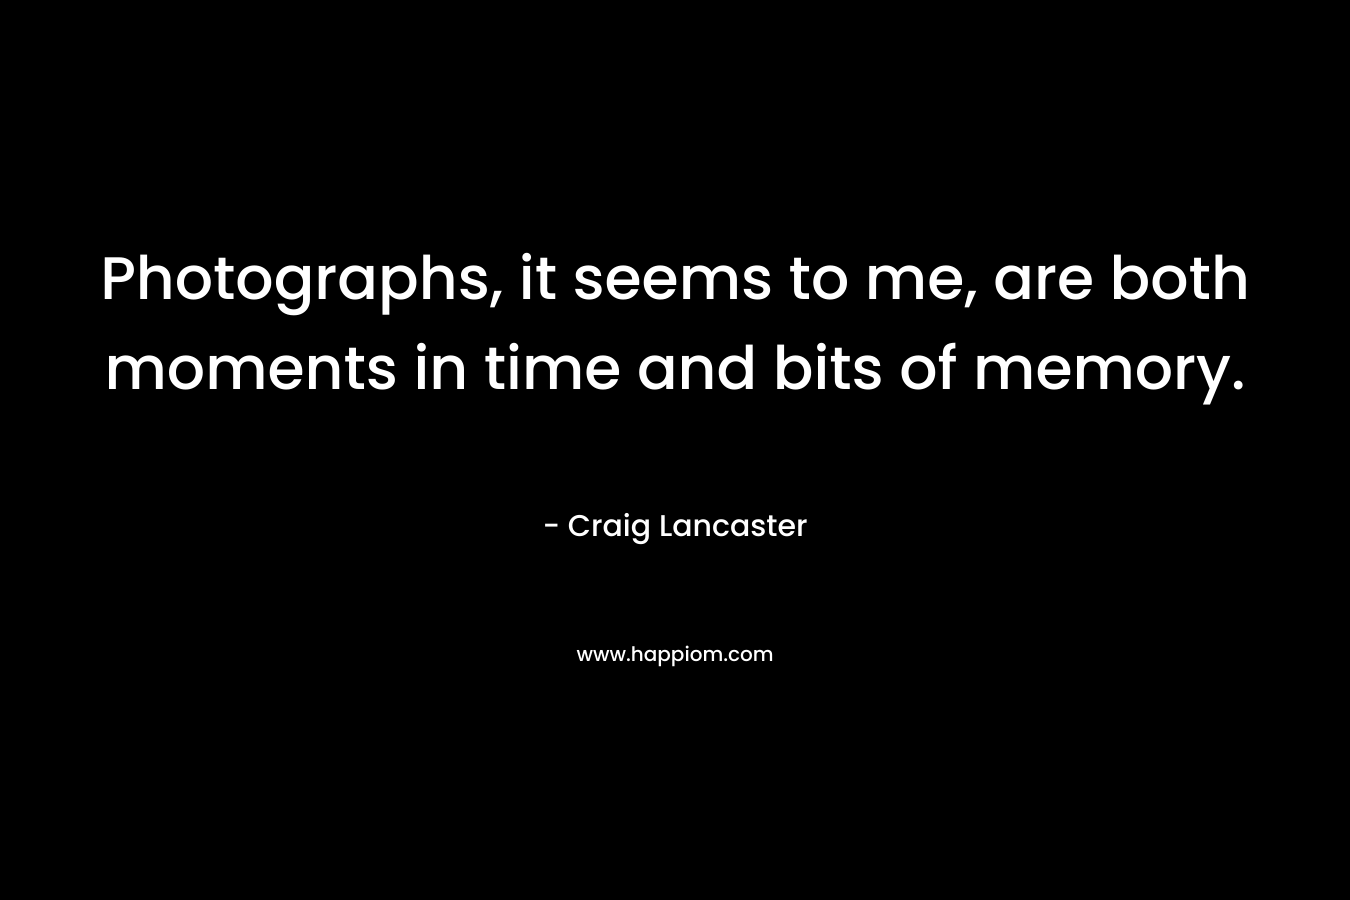 Photographs, it seems to me, are both moments in time and bits of memory. – Craig Lancaster